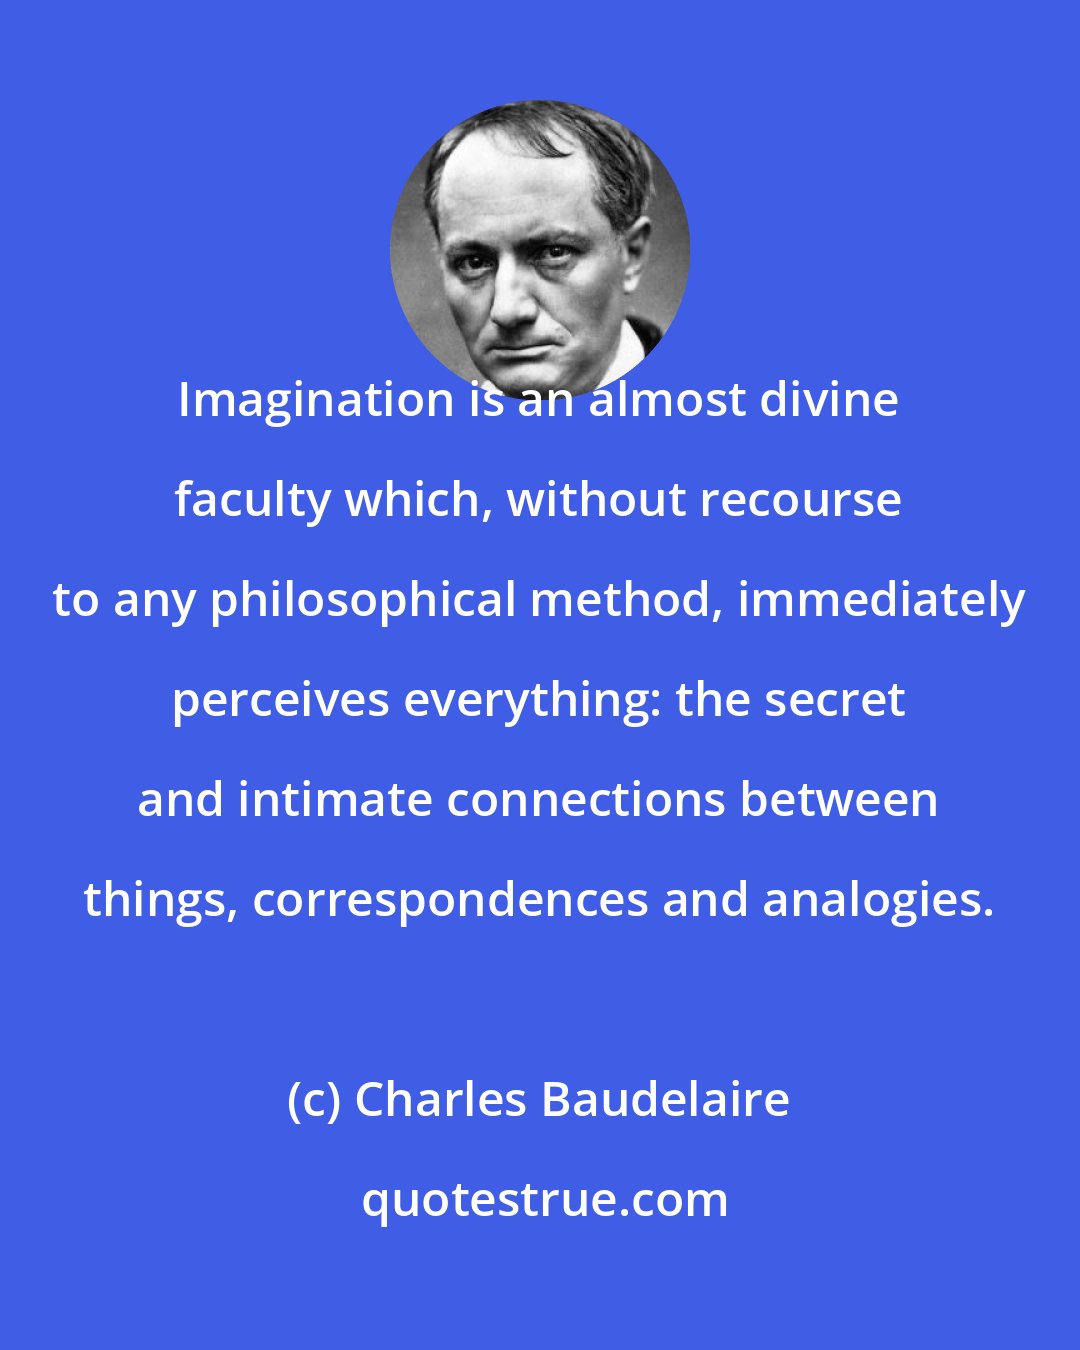 Charles Baudelaire: Imagination is an almost divine faculty which, without recourse to any philosophical method, immediately perceives everything: the secret and intimate connections between things, correspondences and analogies.